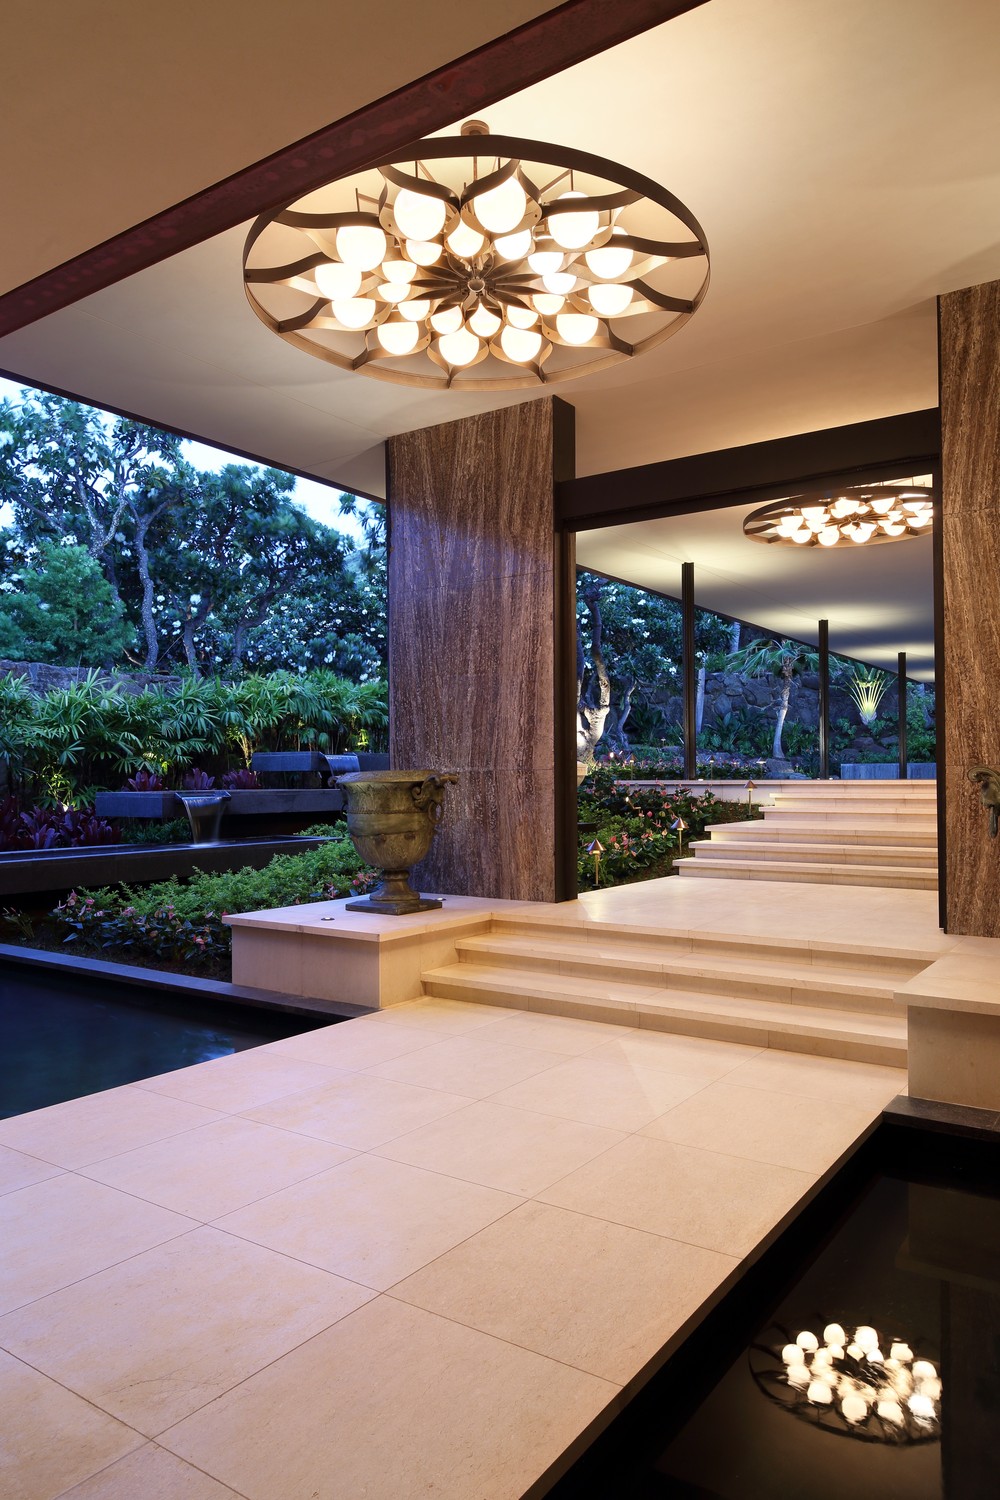 Gio Ponti chandeliers at the Henry Kaiser estate in Hawaii